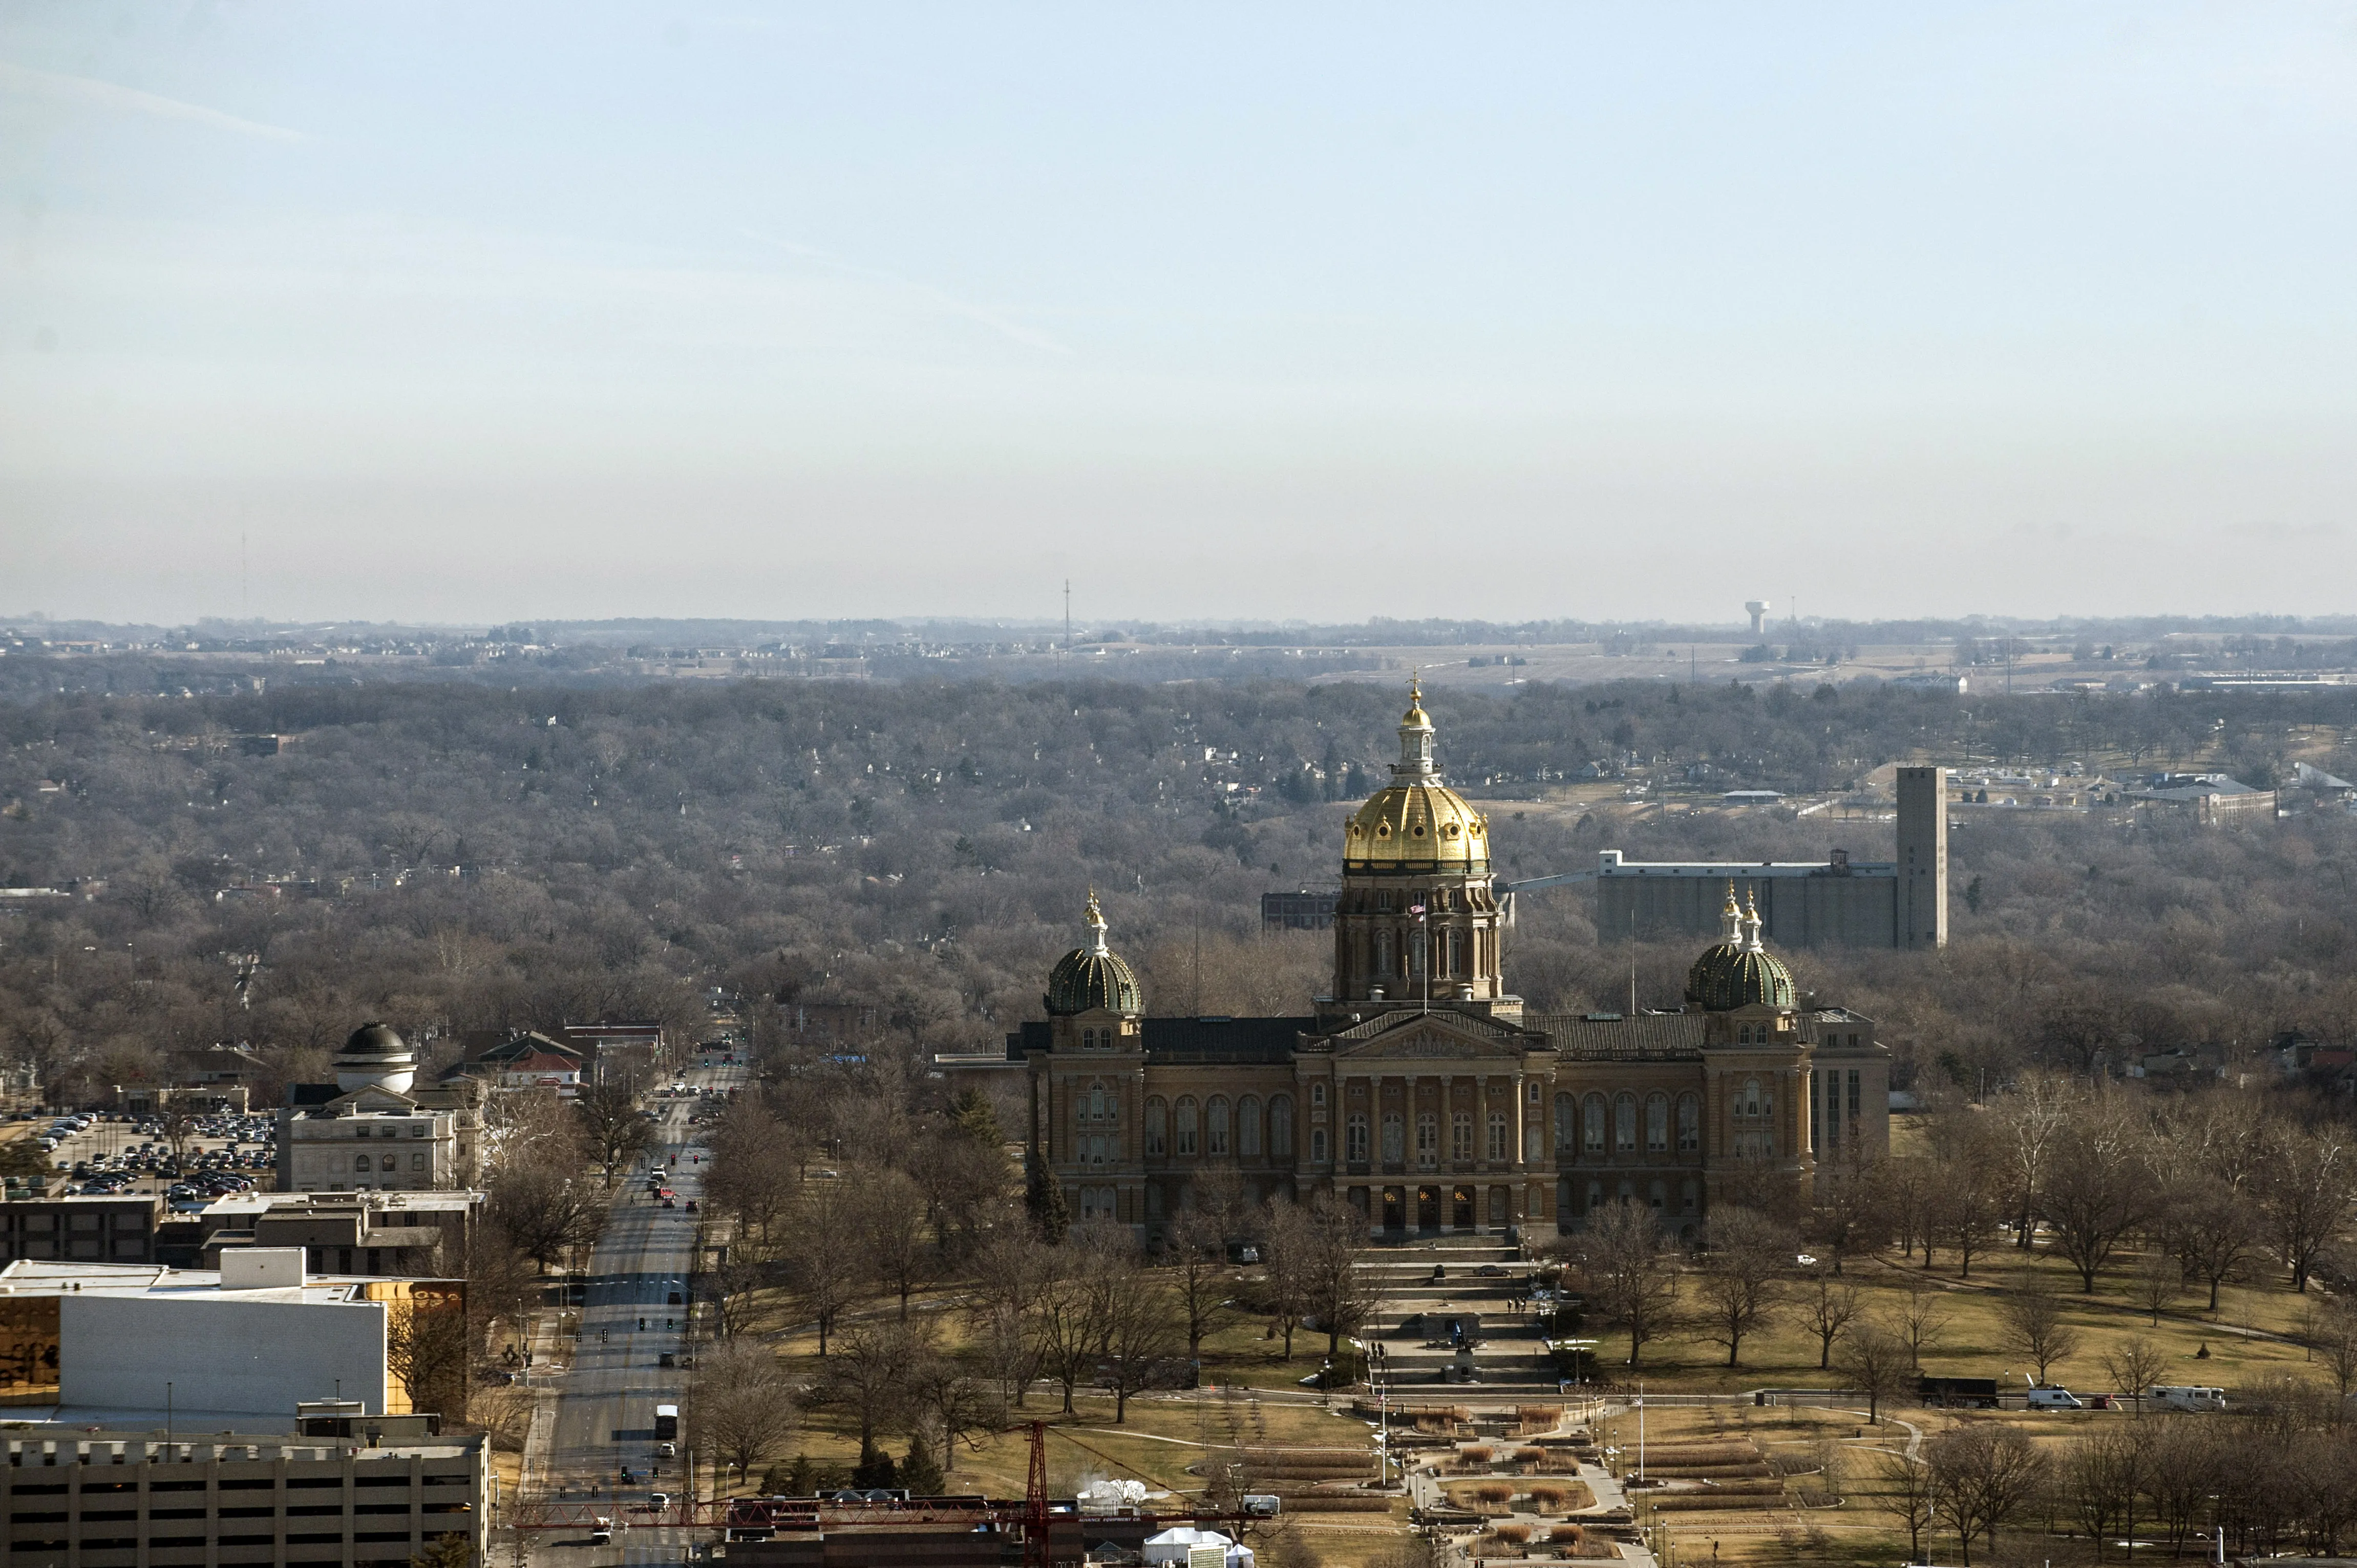 A view of the Iowa State Capitol building in downtown Des Moines, Iowa.?w=200&h=150